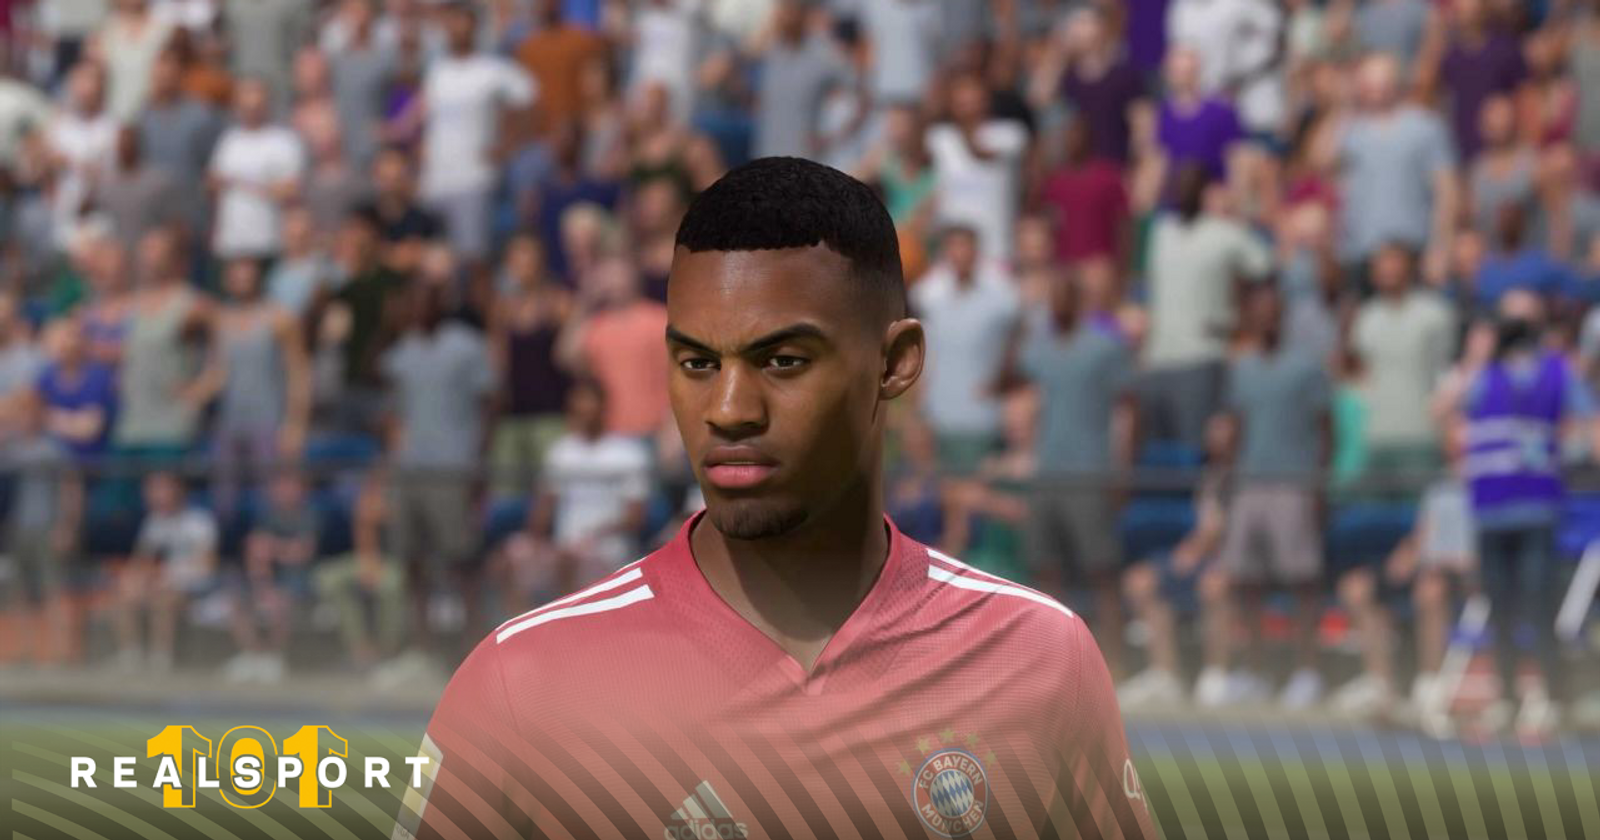 FIFA 23: How Dual Entitlement between PS4 - PS5 and Xbox One